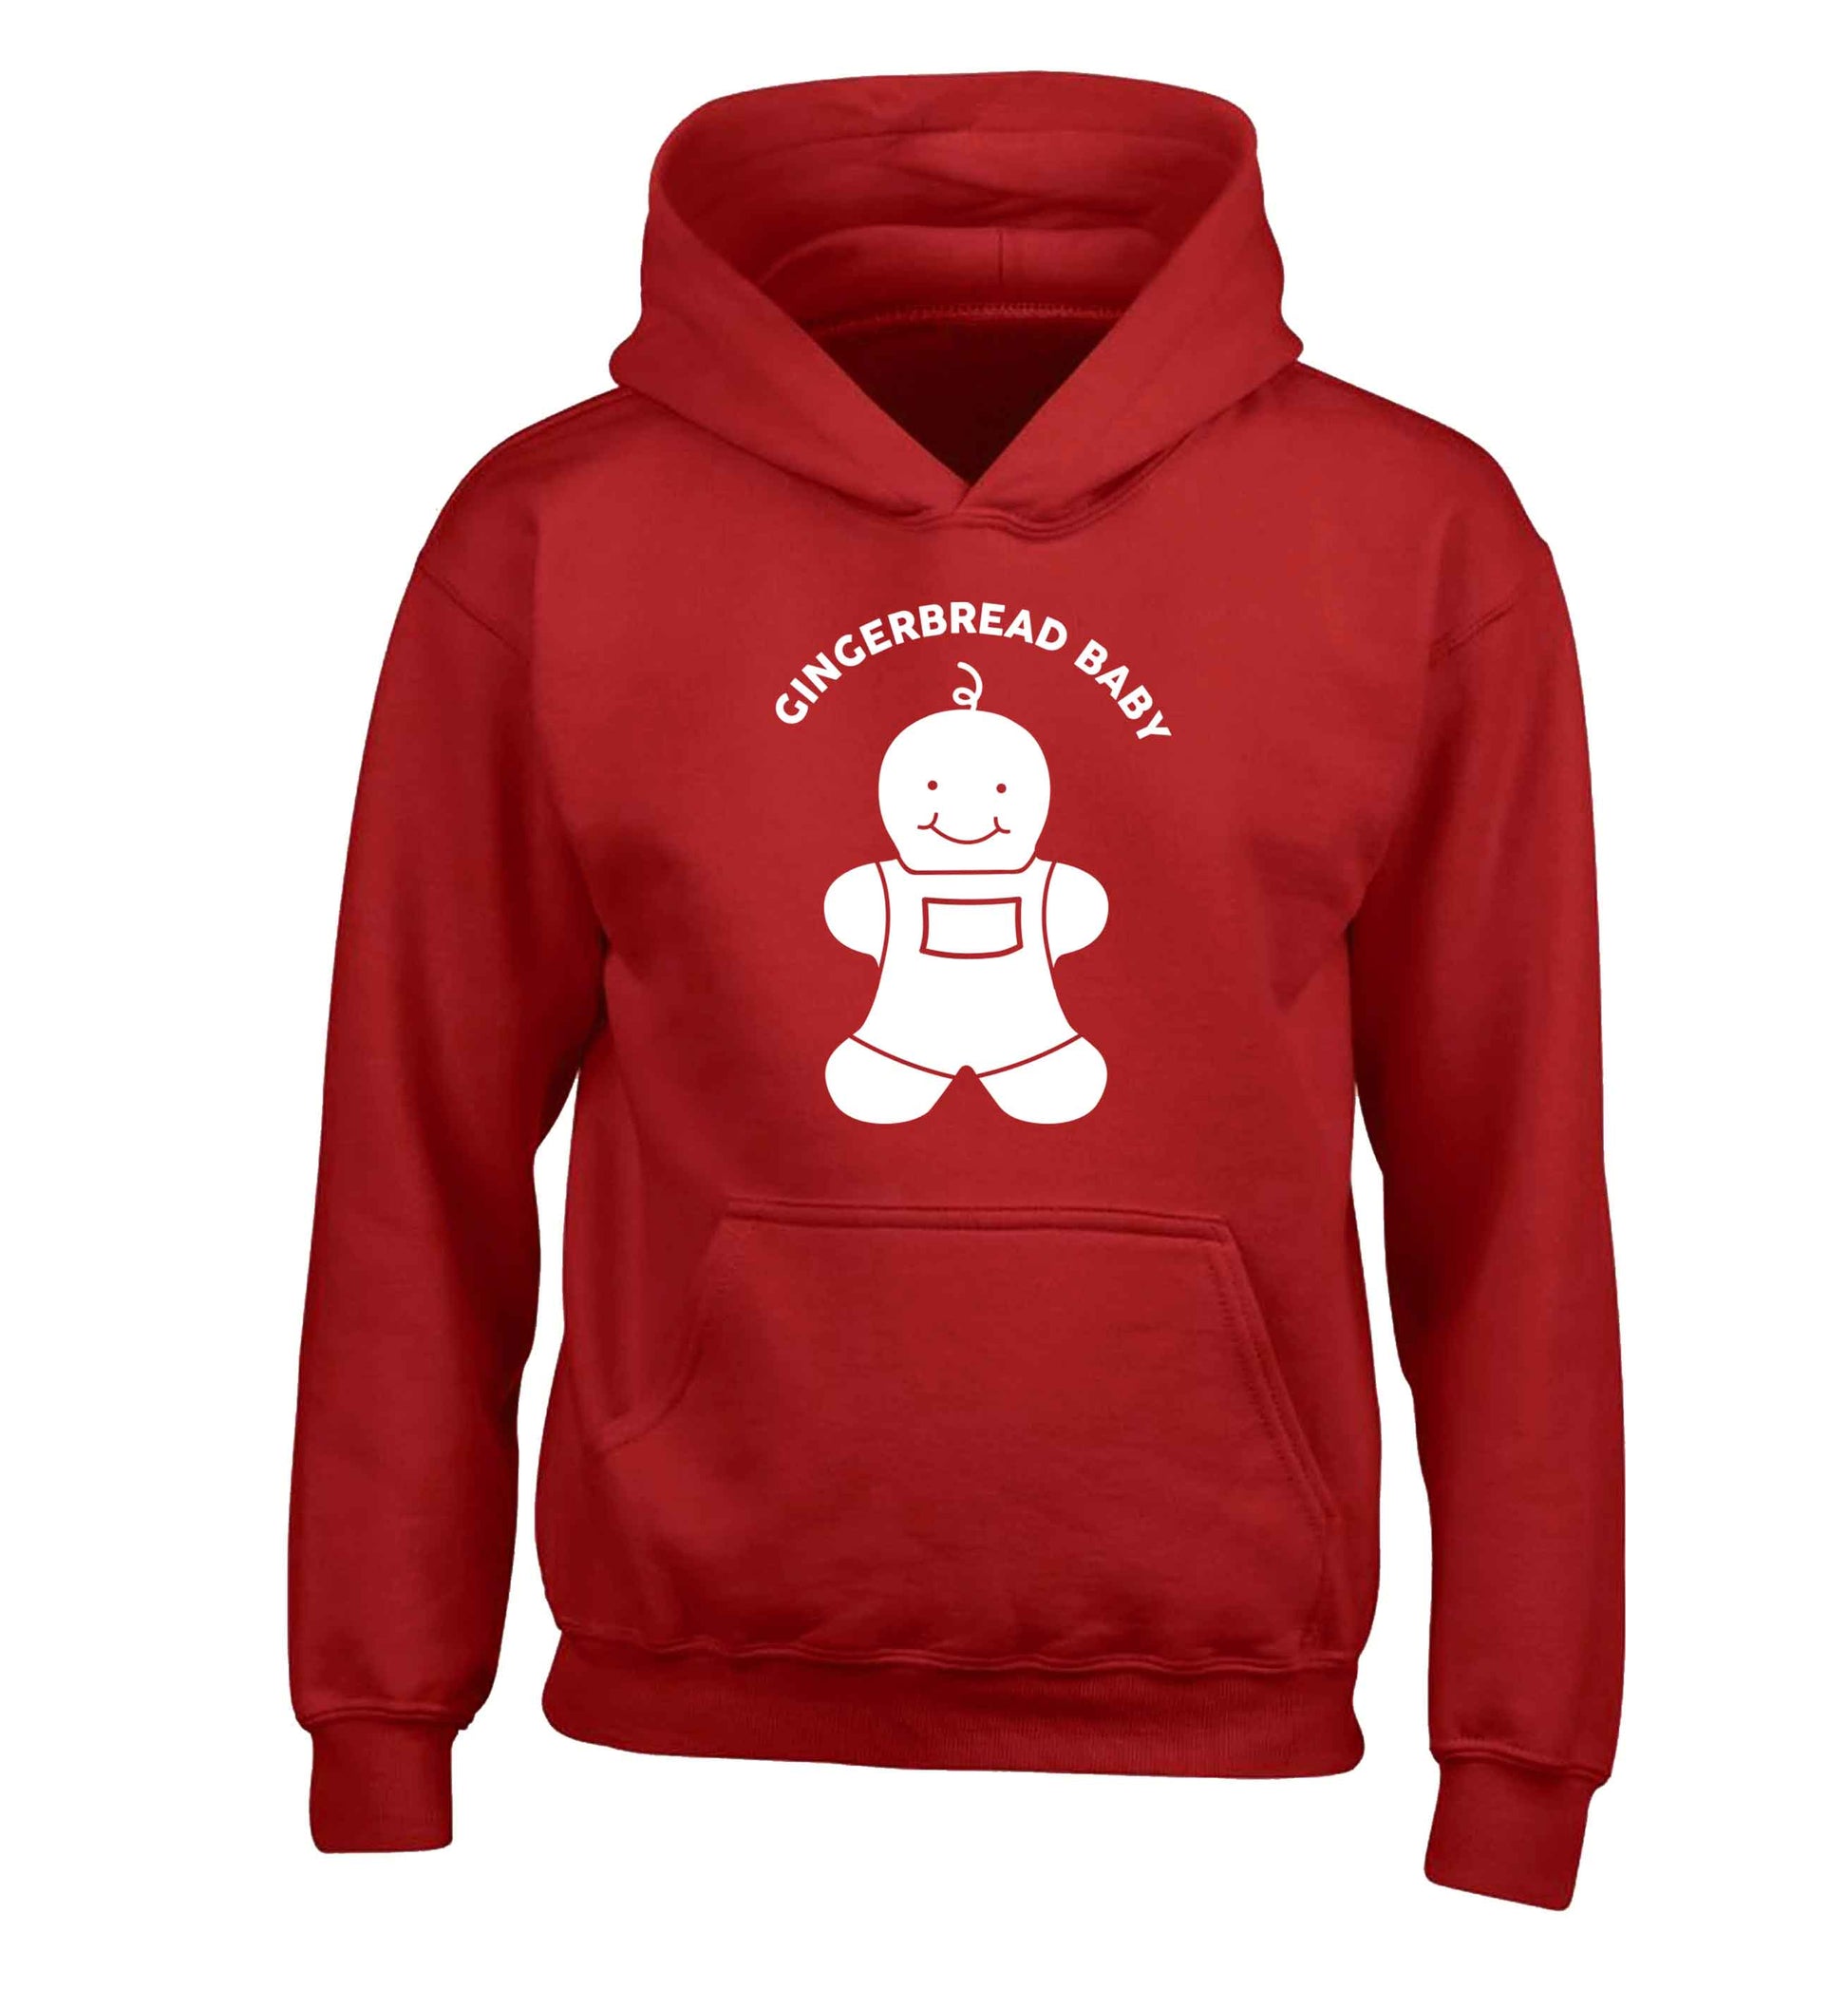 Gingerbread baby children's red hoodie 12-13 Years